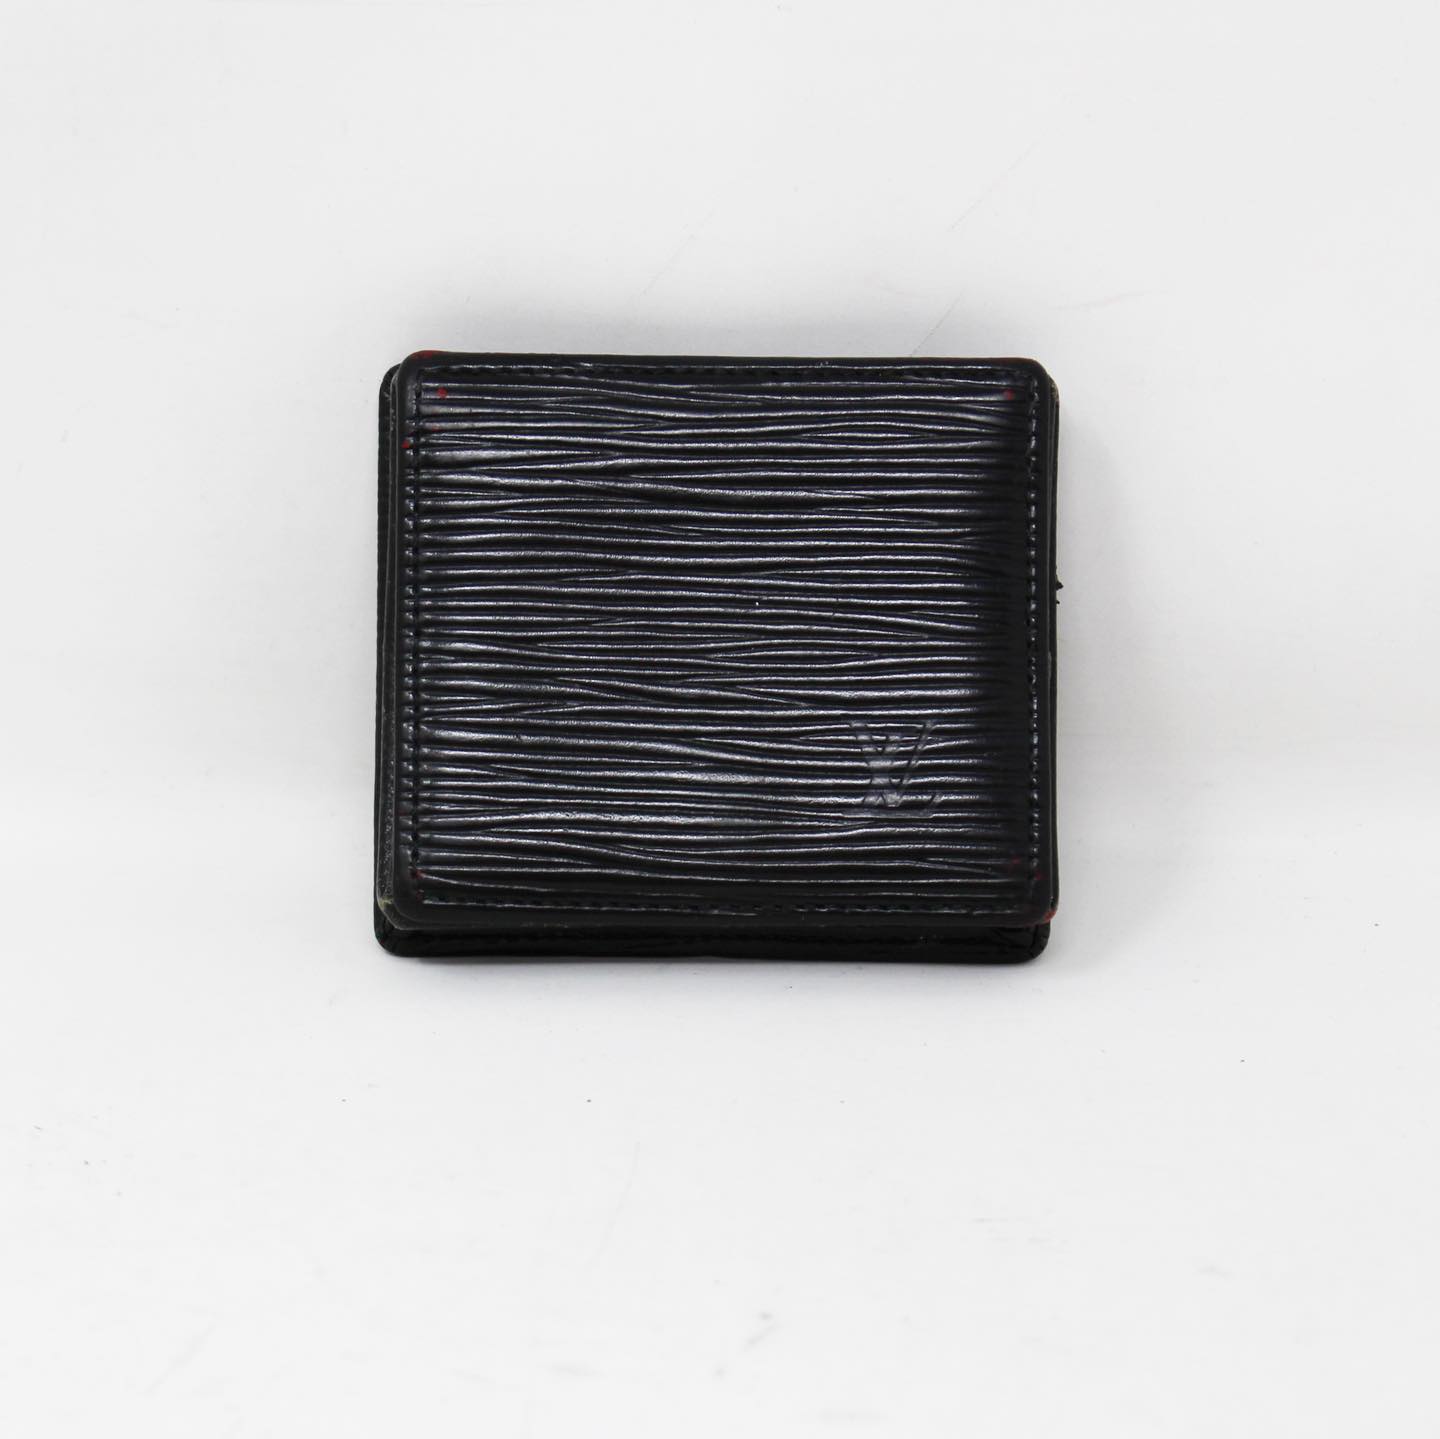 Black EPI Leather Wallet (Authentic Pre-Owned)